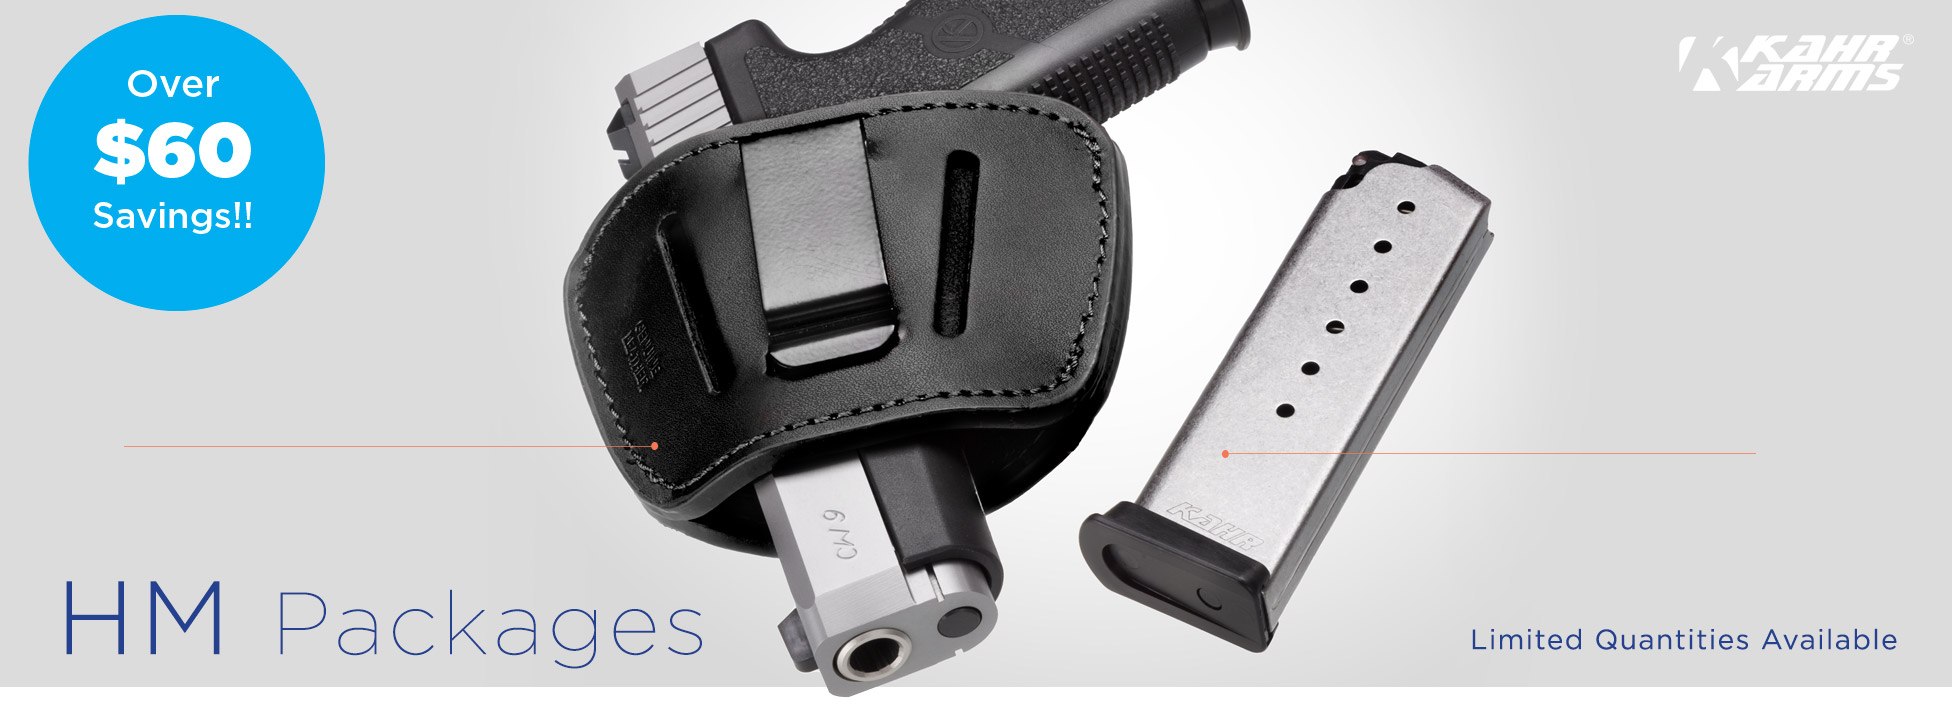 Kahr Value Series HM Packages - Limited Quantities Available